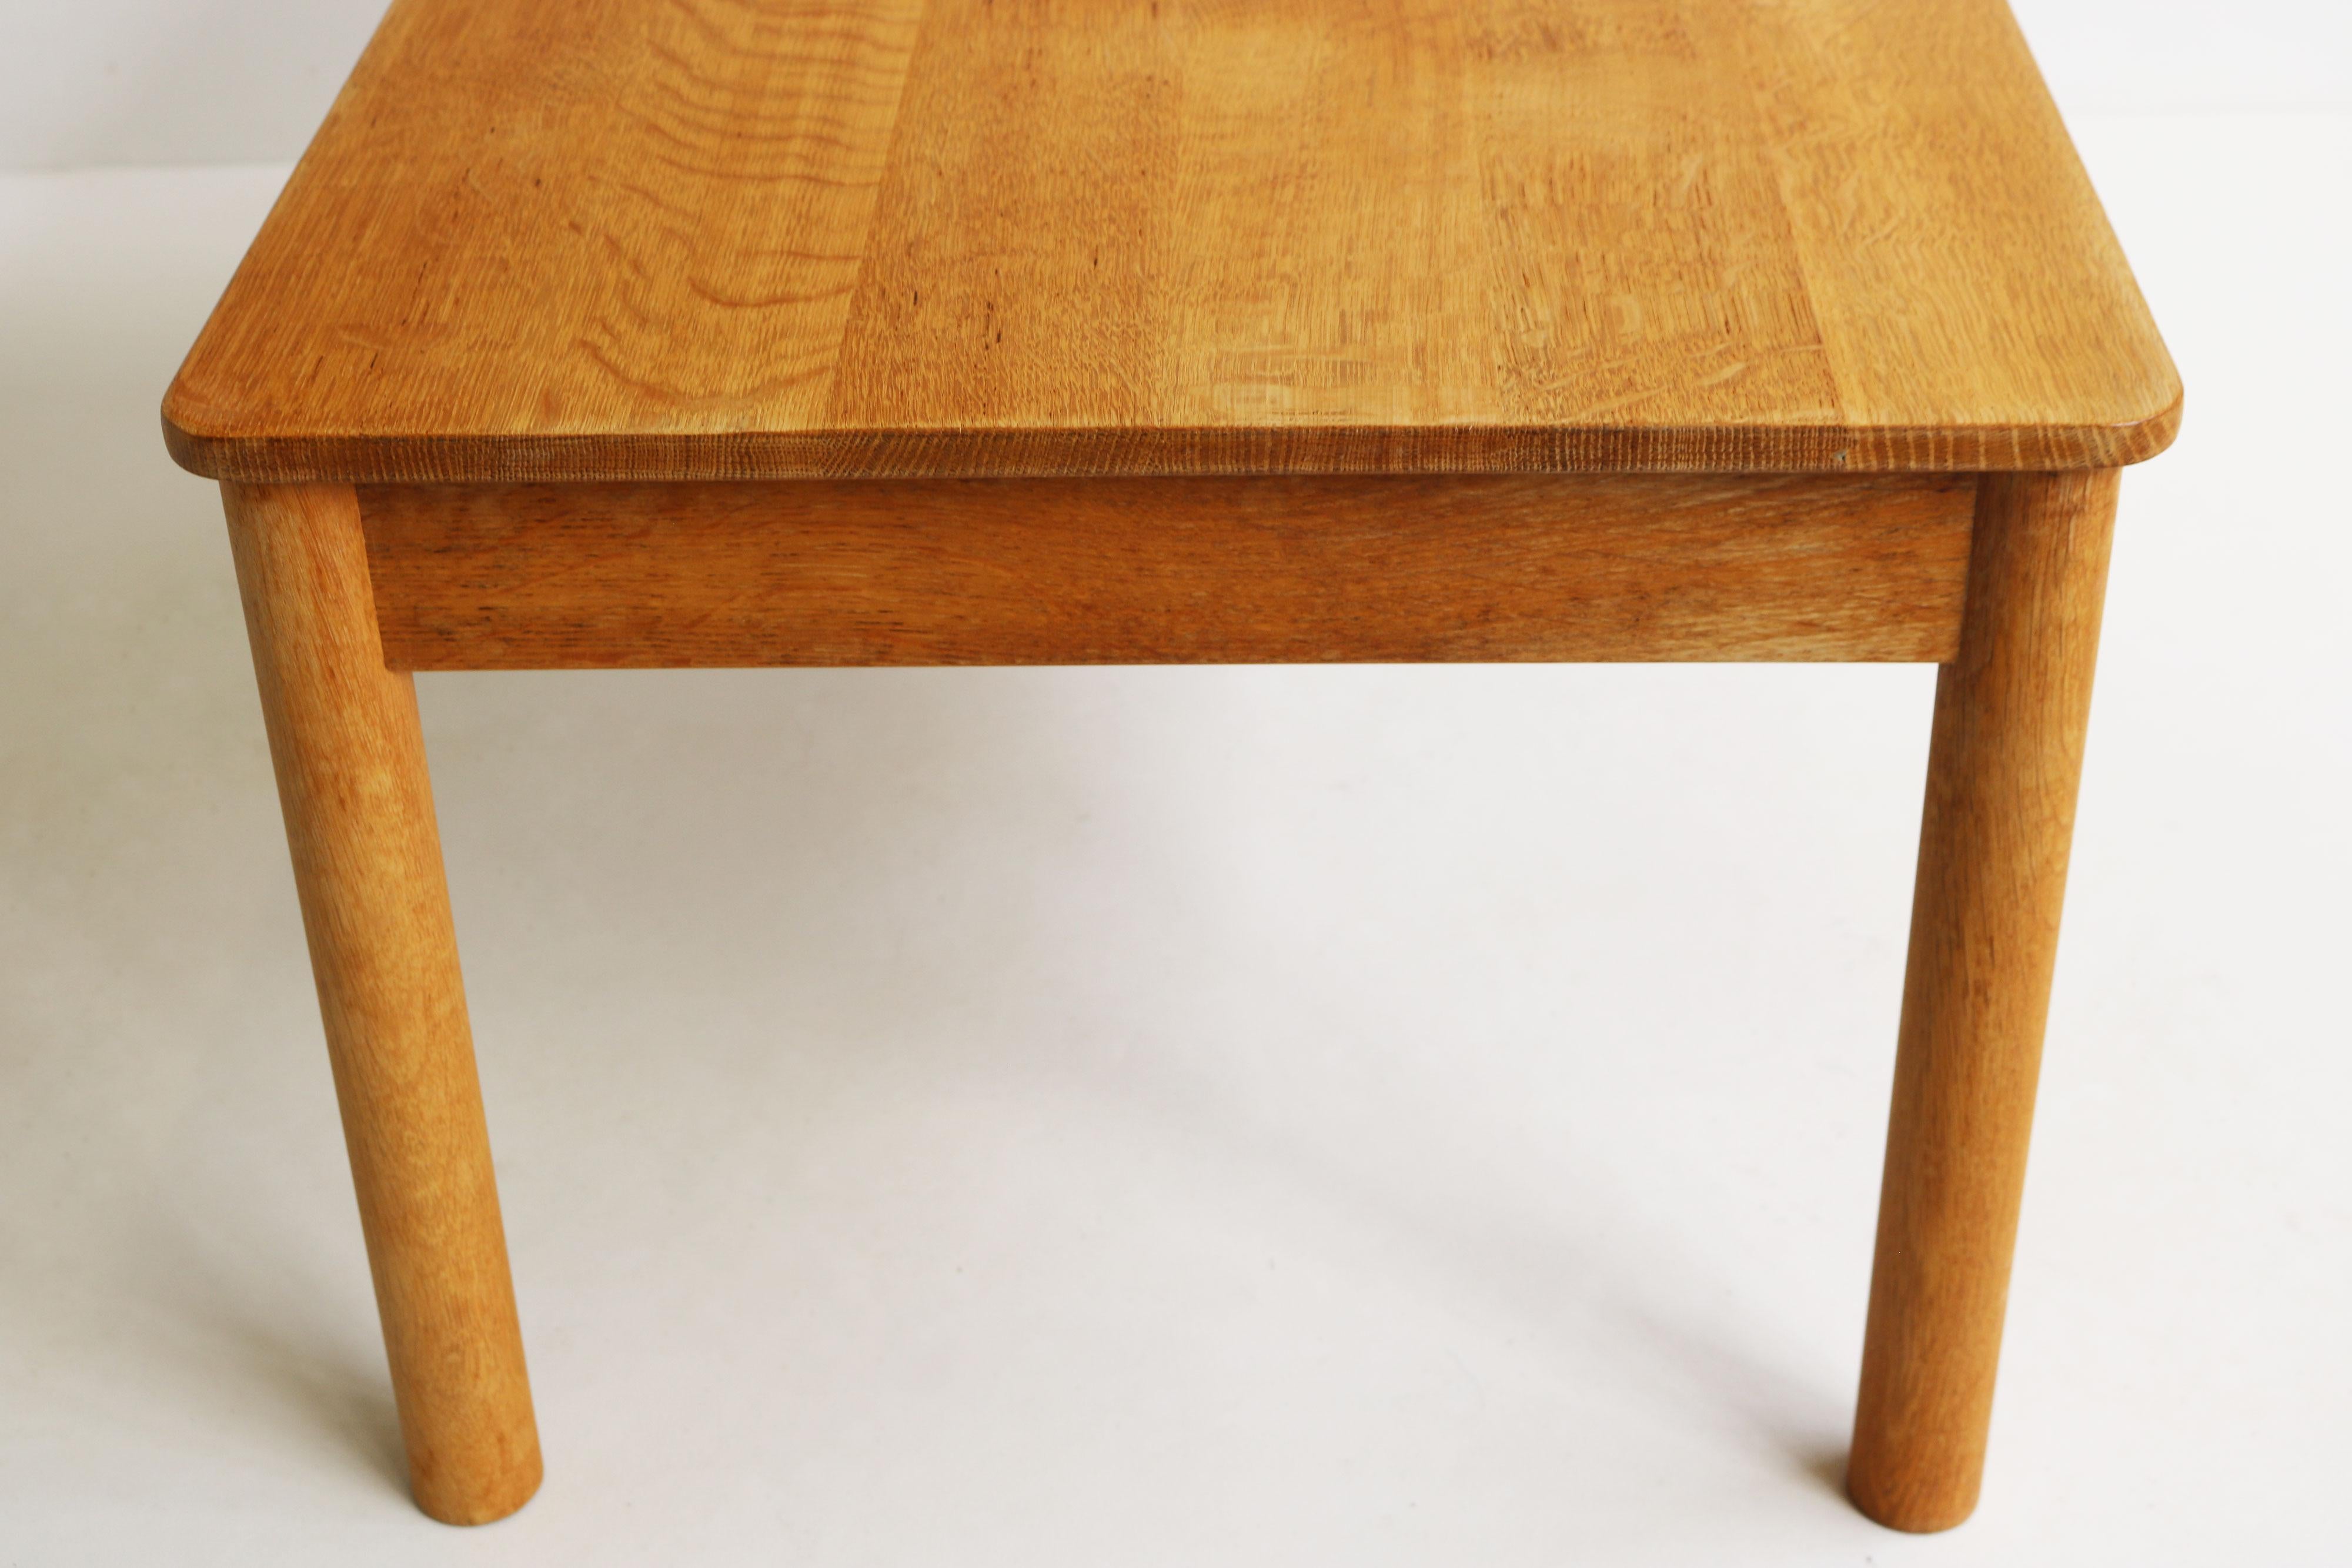 Solid oak coffee table Model: 5350 by Borge Mogensen 1950 Shaker syle side table In Good Condition For Sale In Ijzendijke, NL